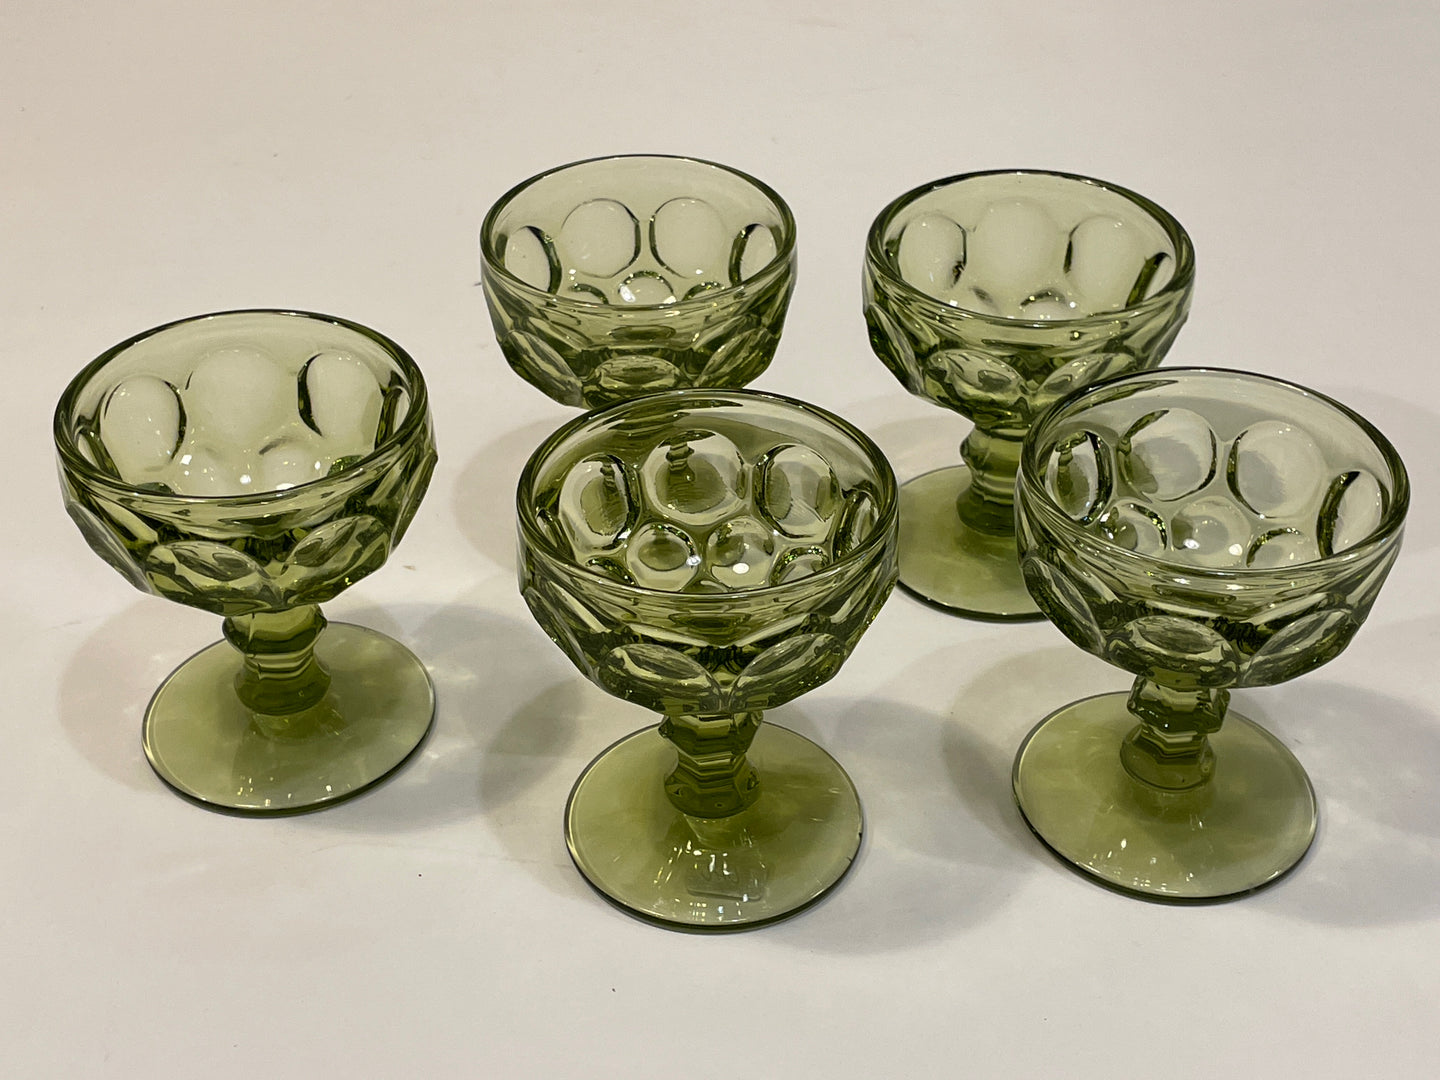 Six Verde Green Imperial Thumbprint Champagne Coupe Glasses